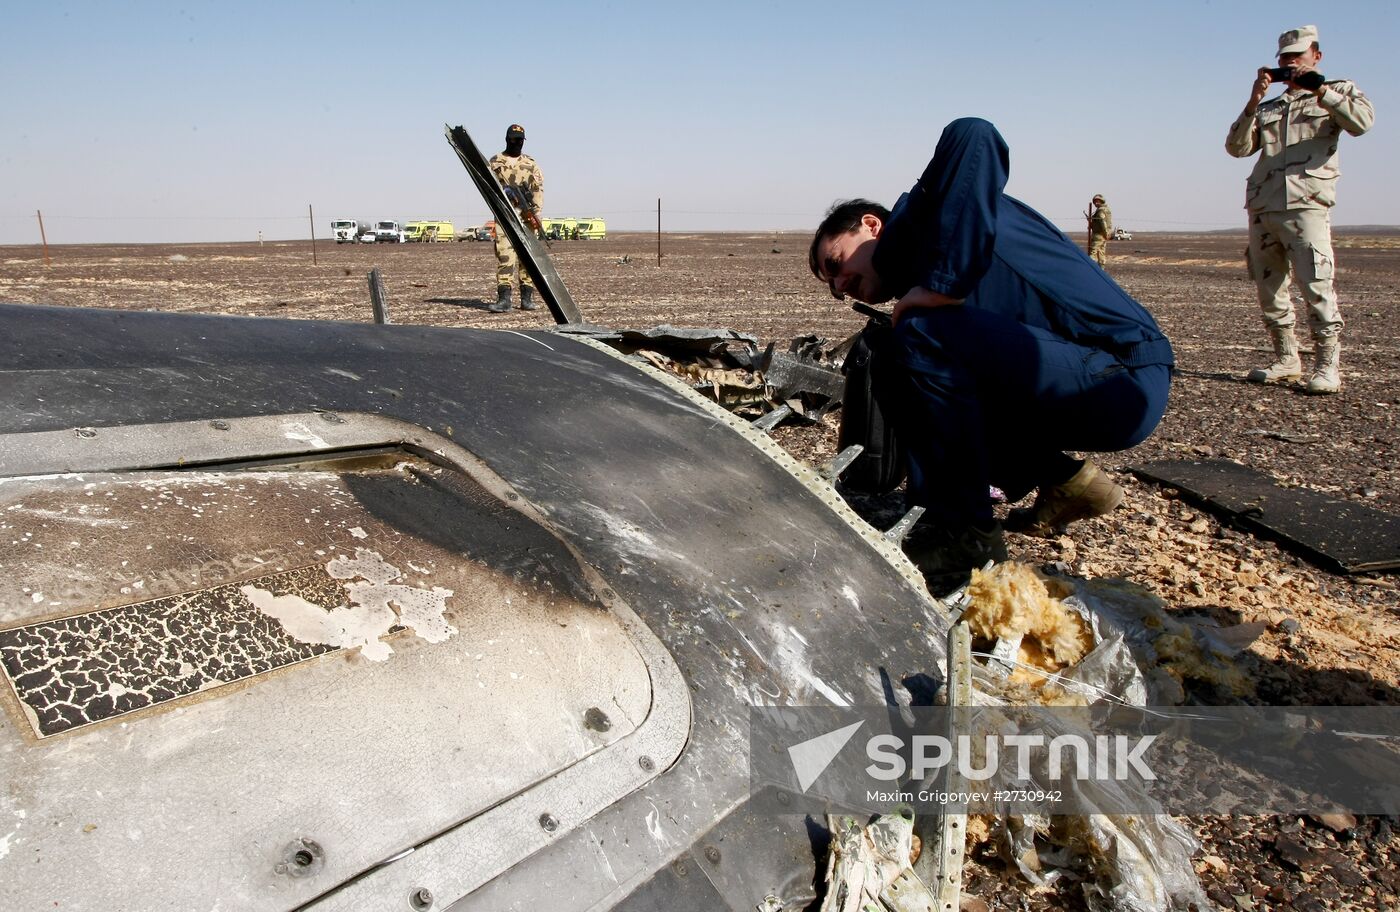 Airbus A321 crash site in Egypt